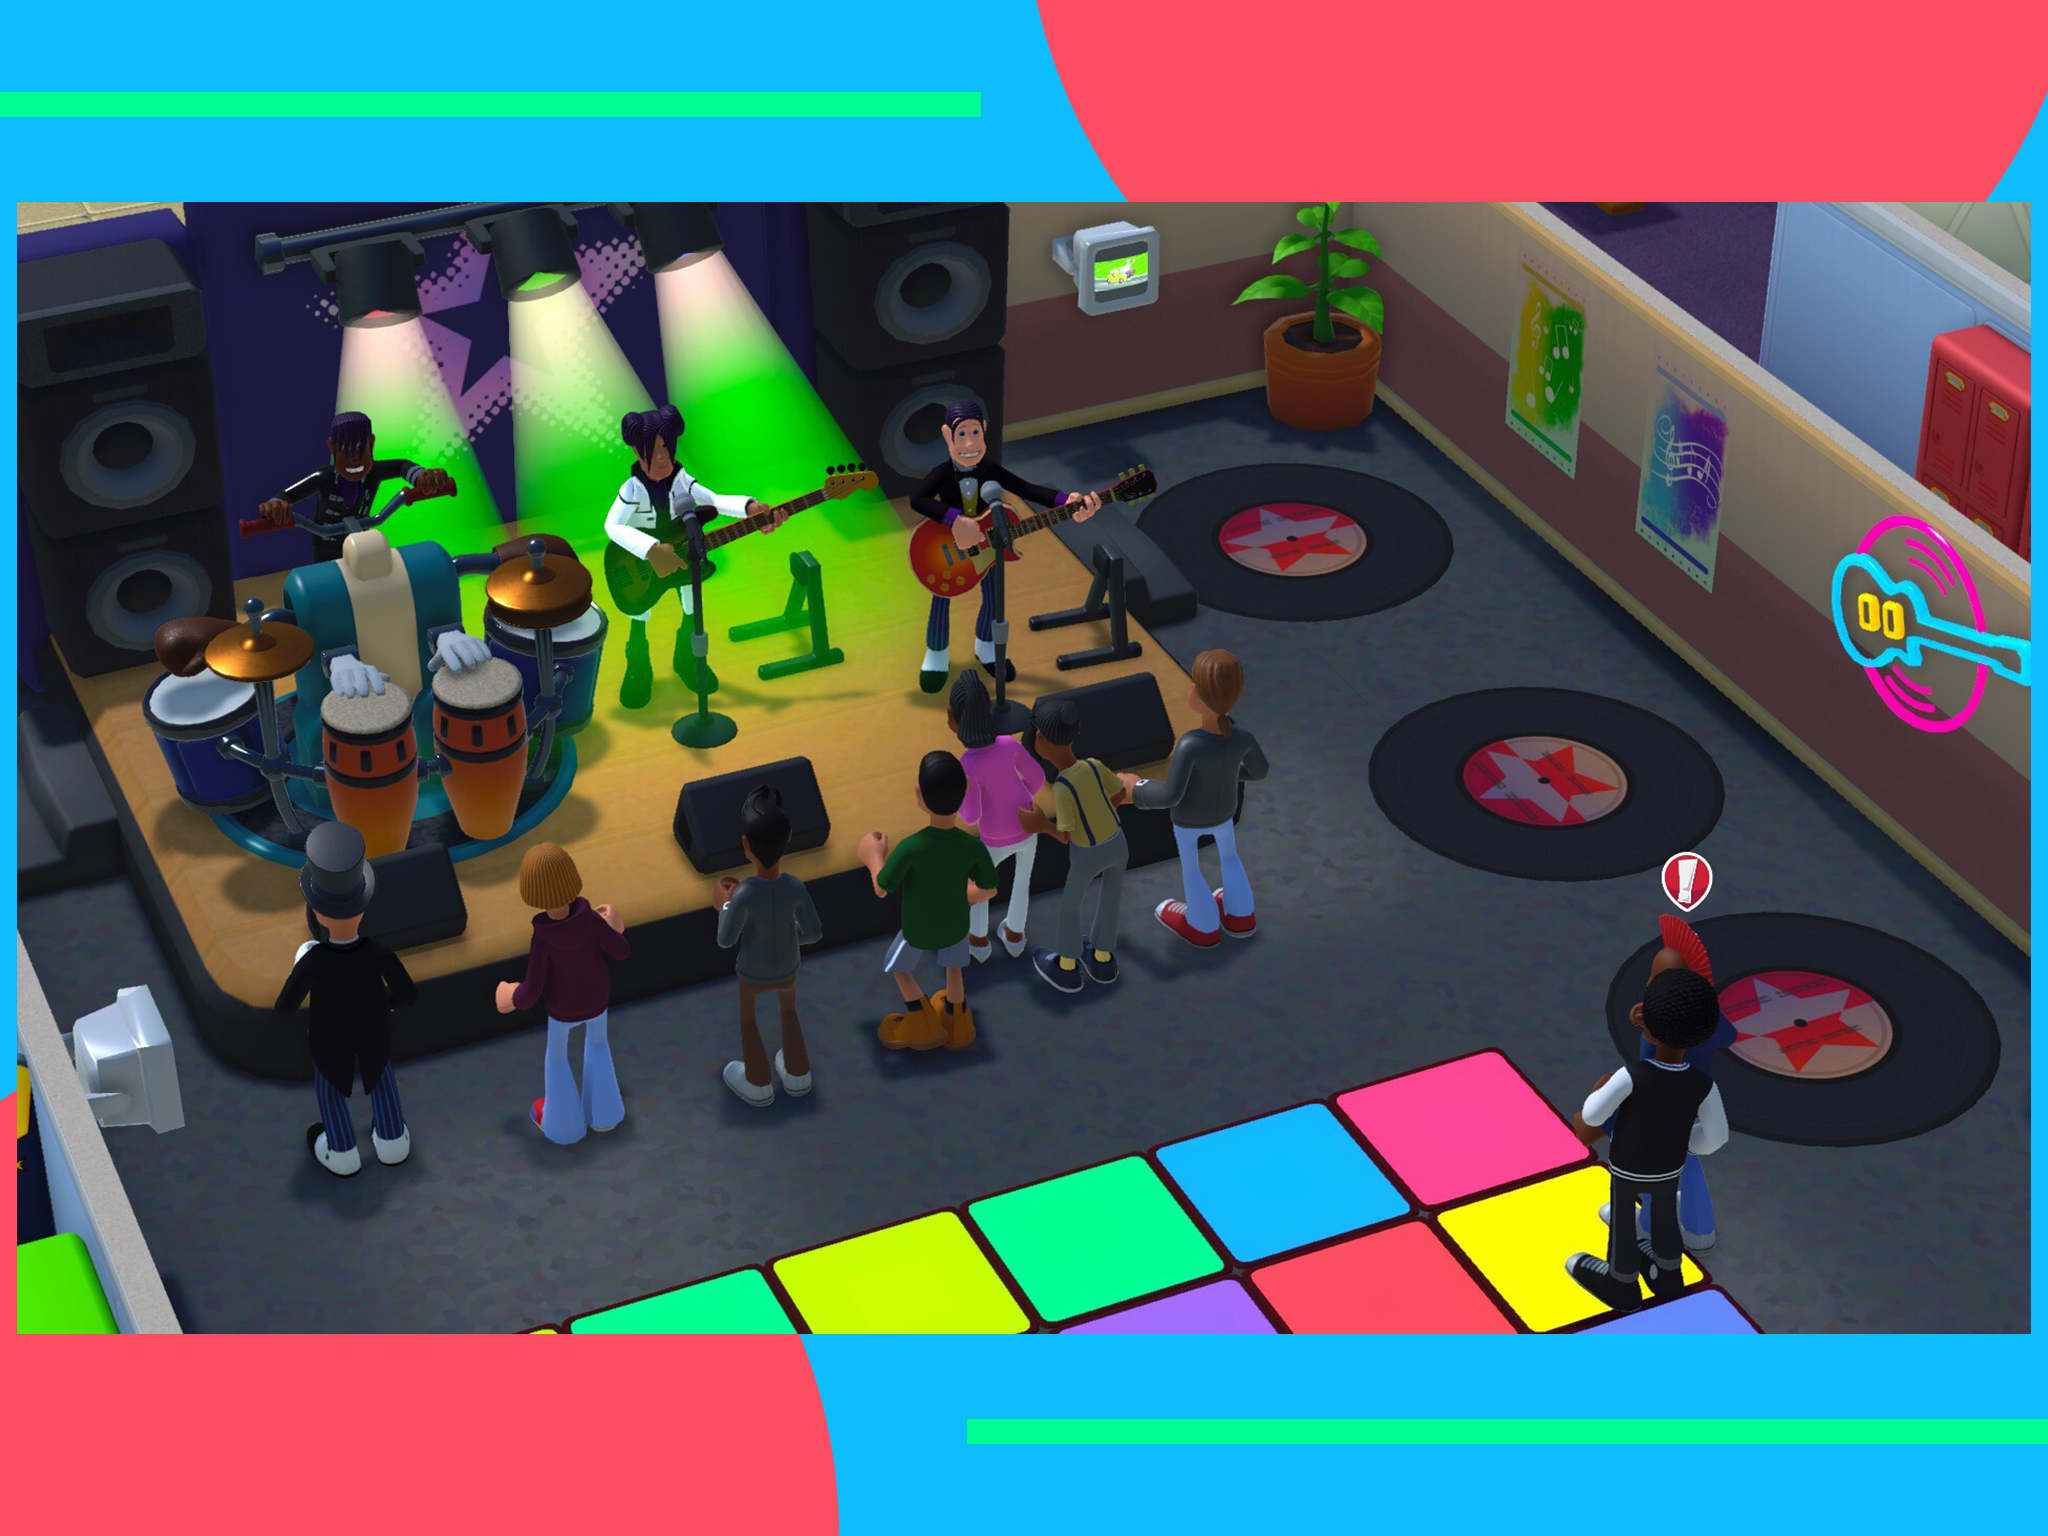 Unwind after class by throwing a party at the student union